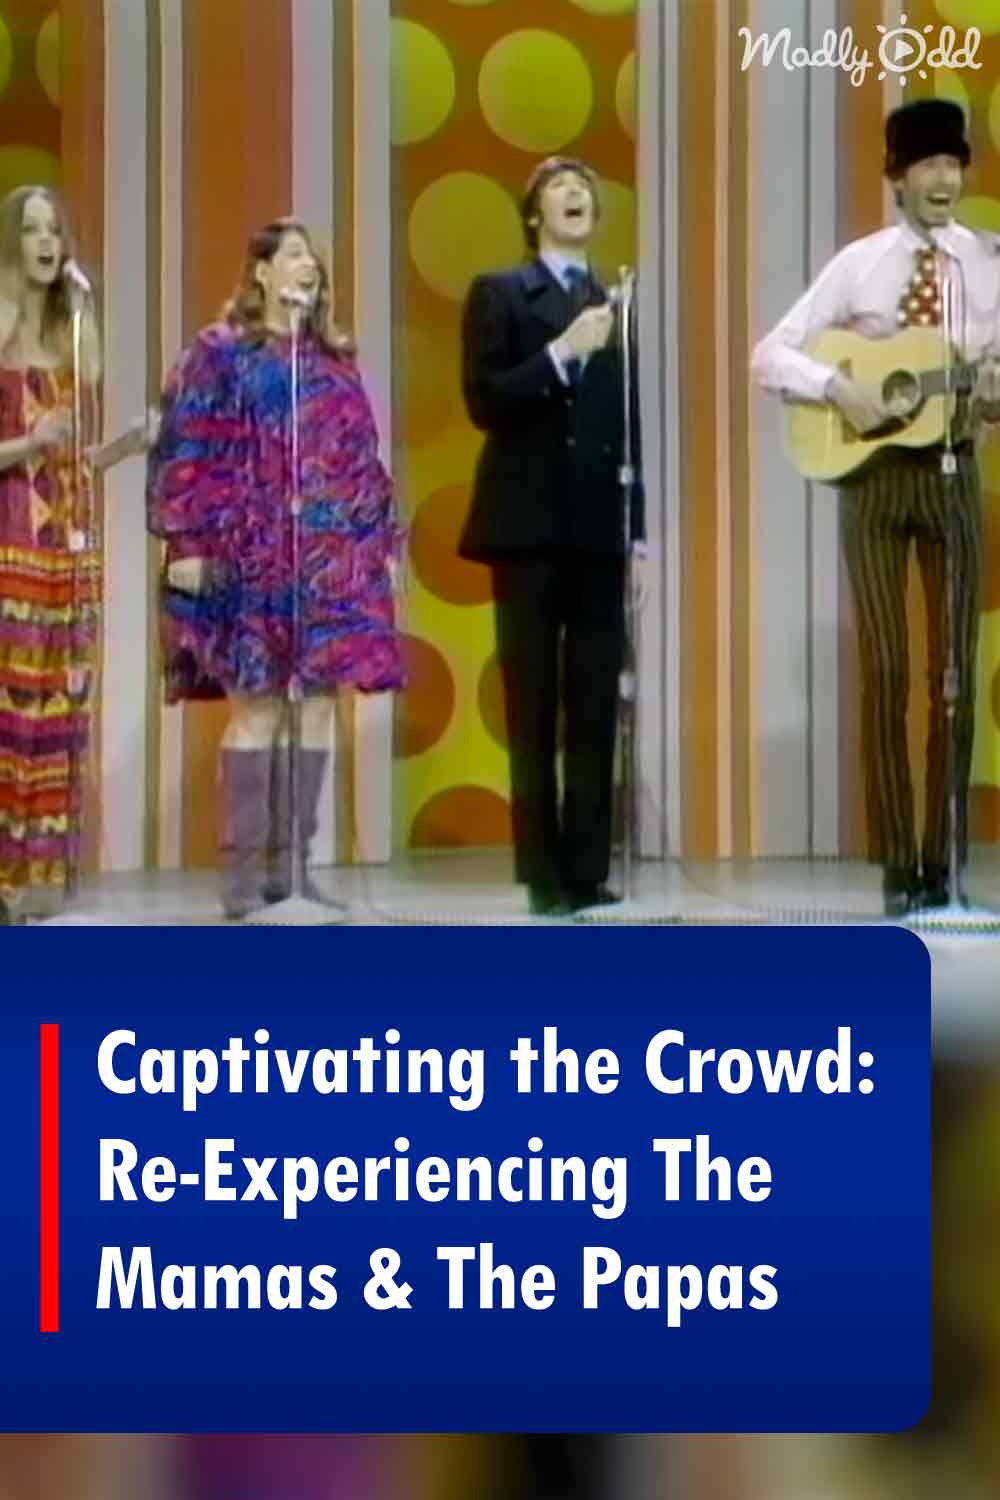 Captivating the Crowd: Re-Experiencing The Mamas & The Papas